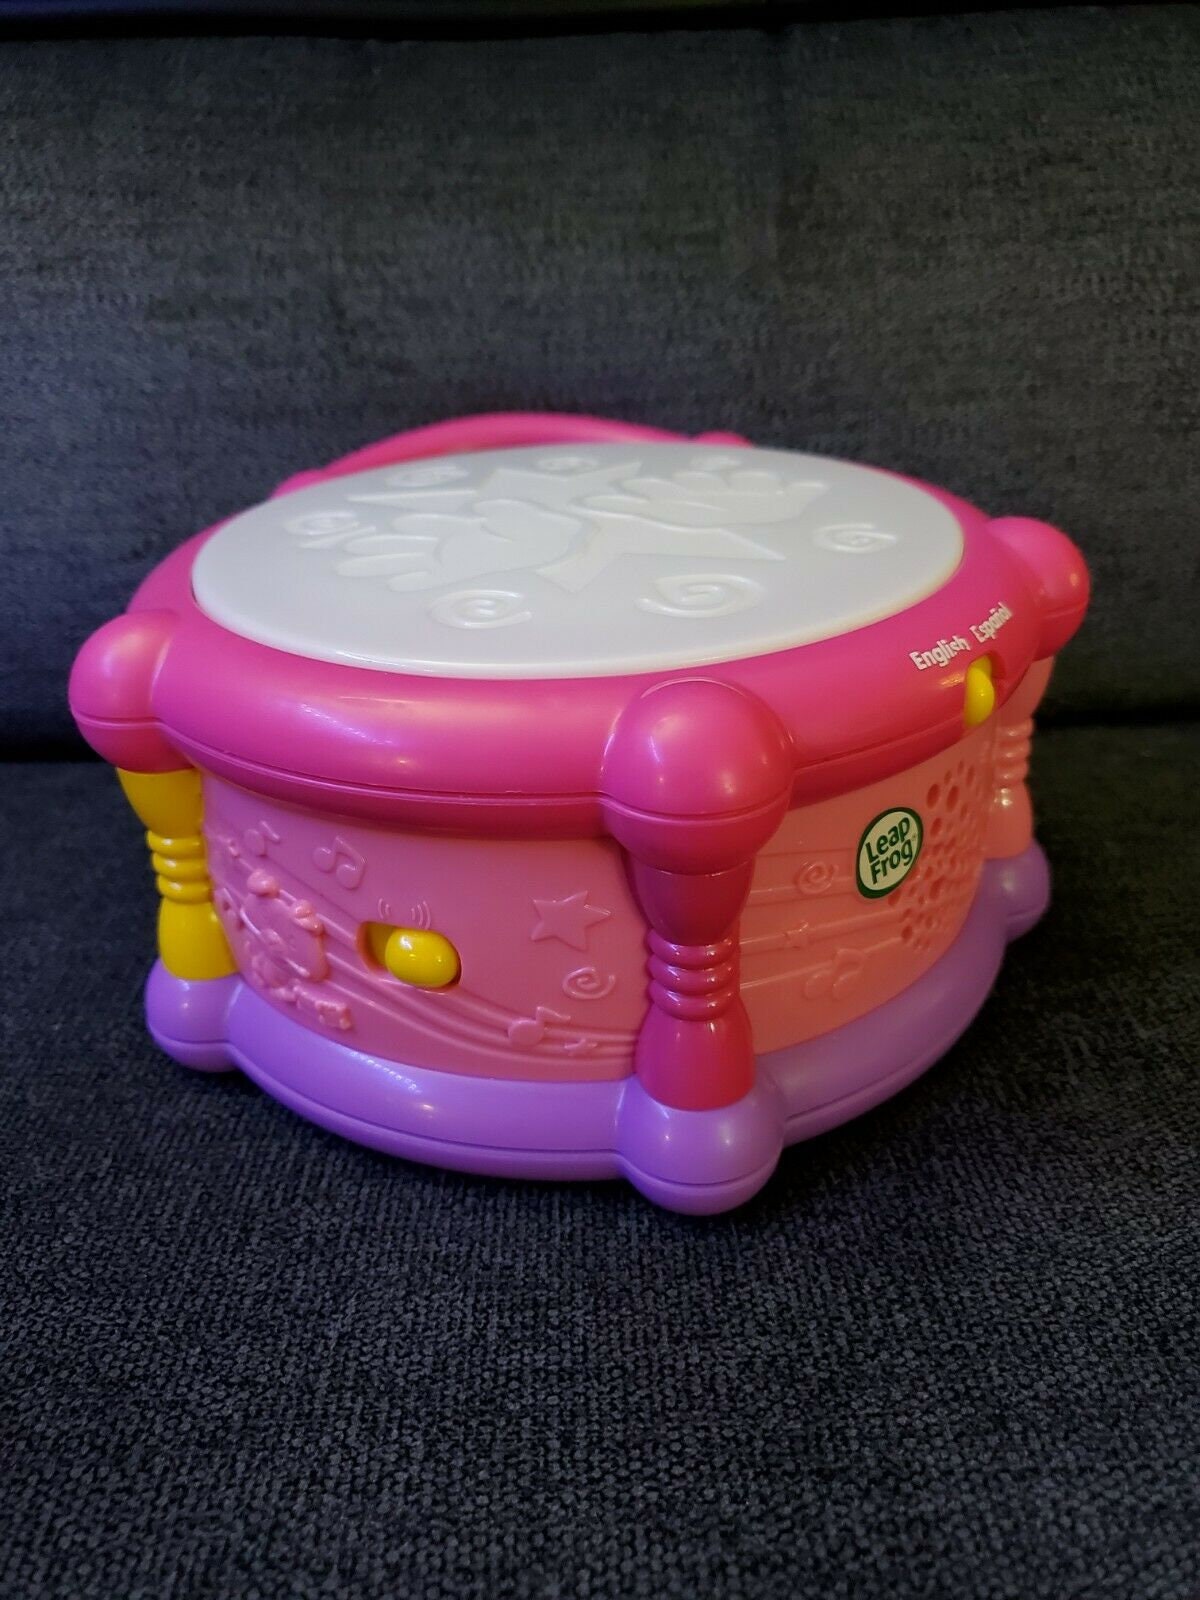 LeapFrog Learn & Groove Color Play Drum Bilingual Pink 